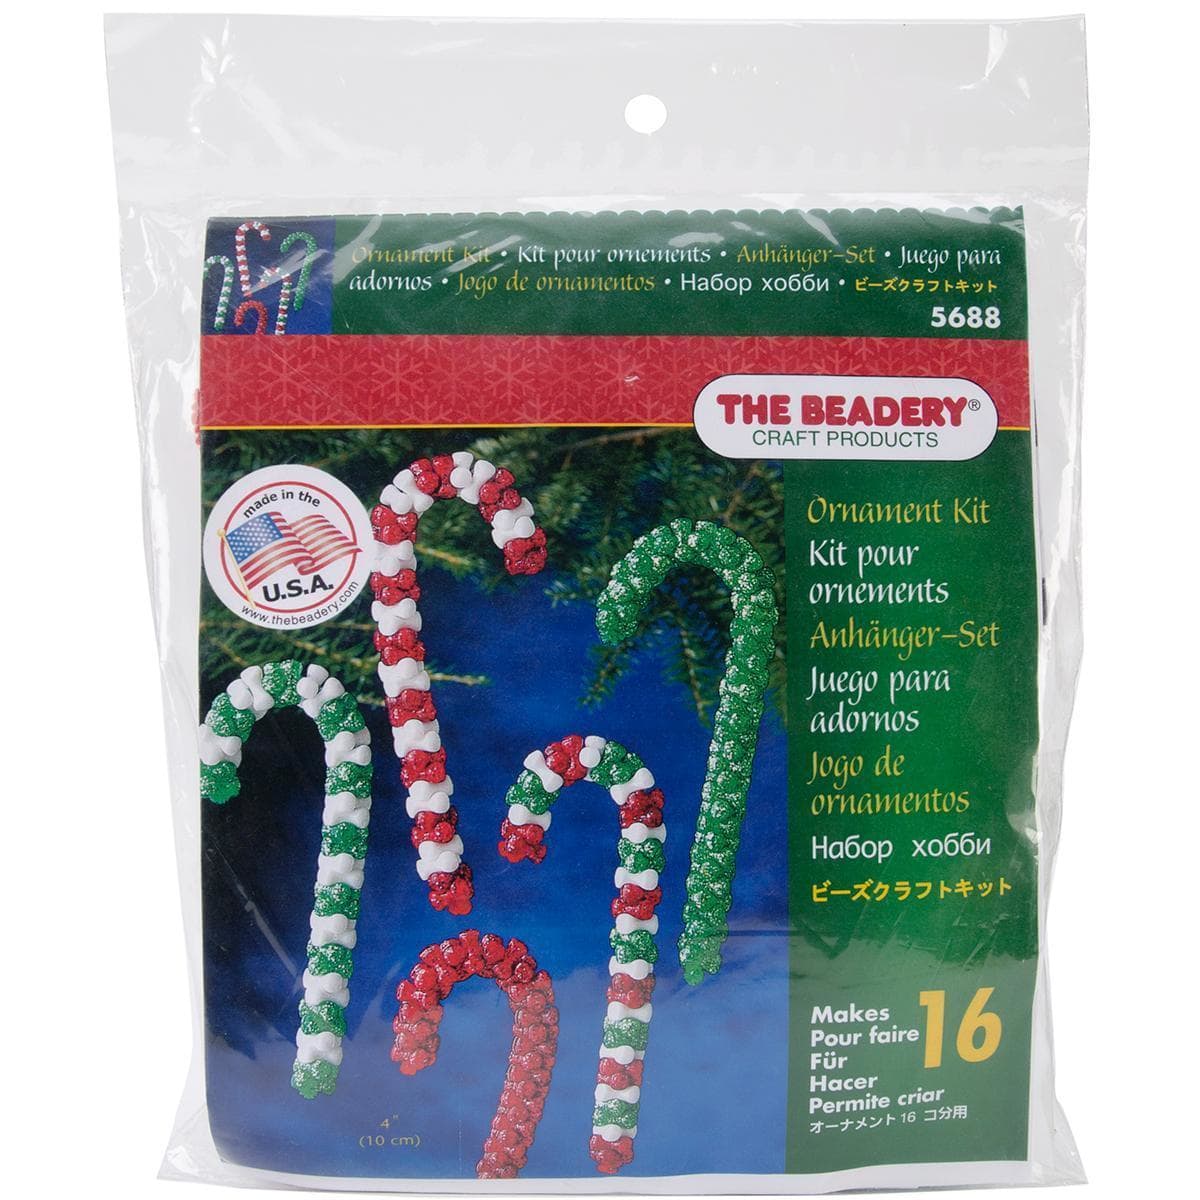 CANDY CANE ASSORTMENT HOLIDAY ORNAMENT KIT - image 2 of 2